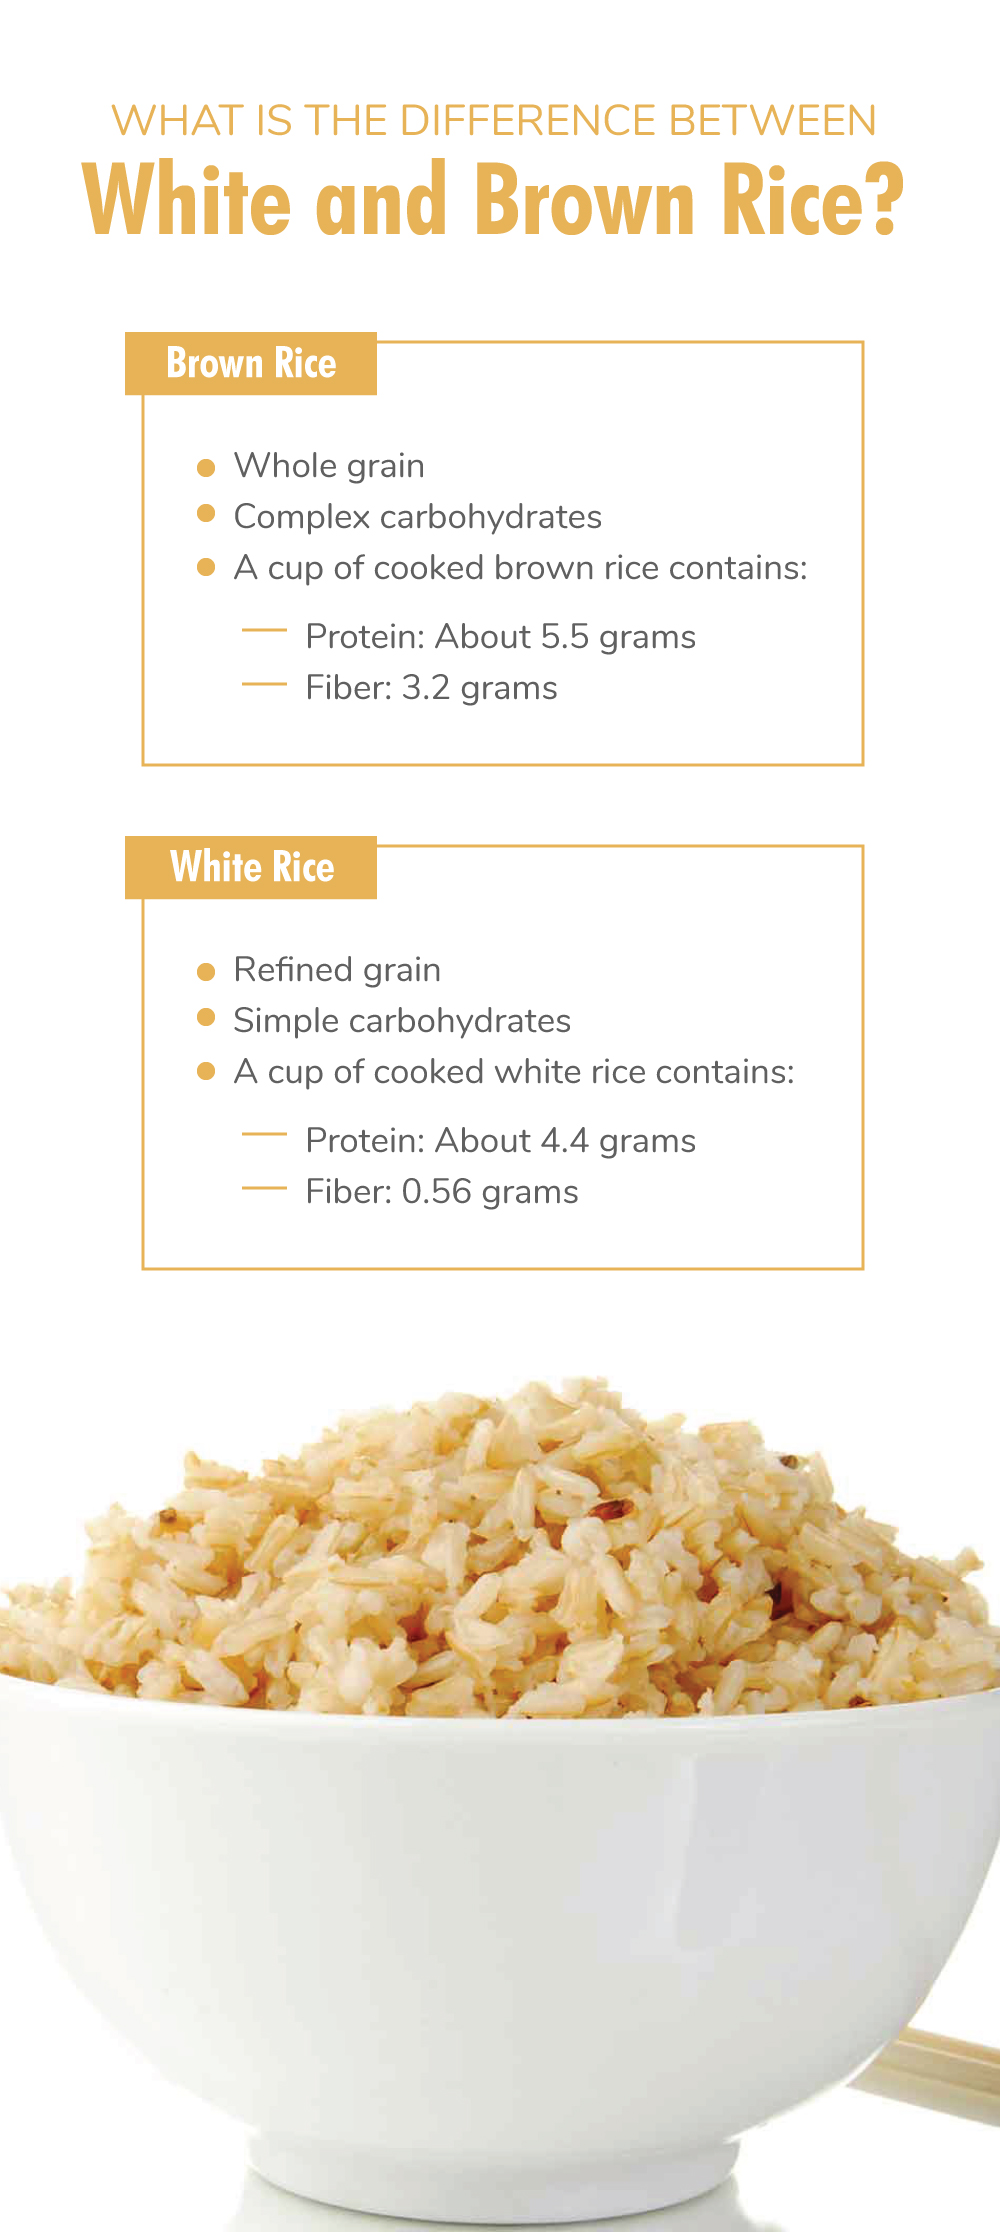 What Is the Difference Between White and Brown Rice?